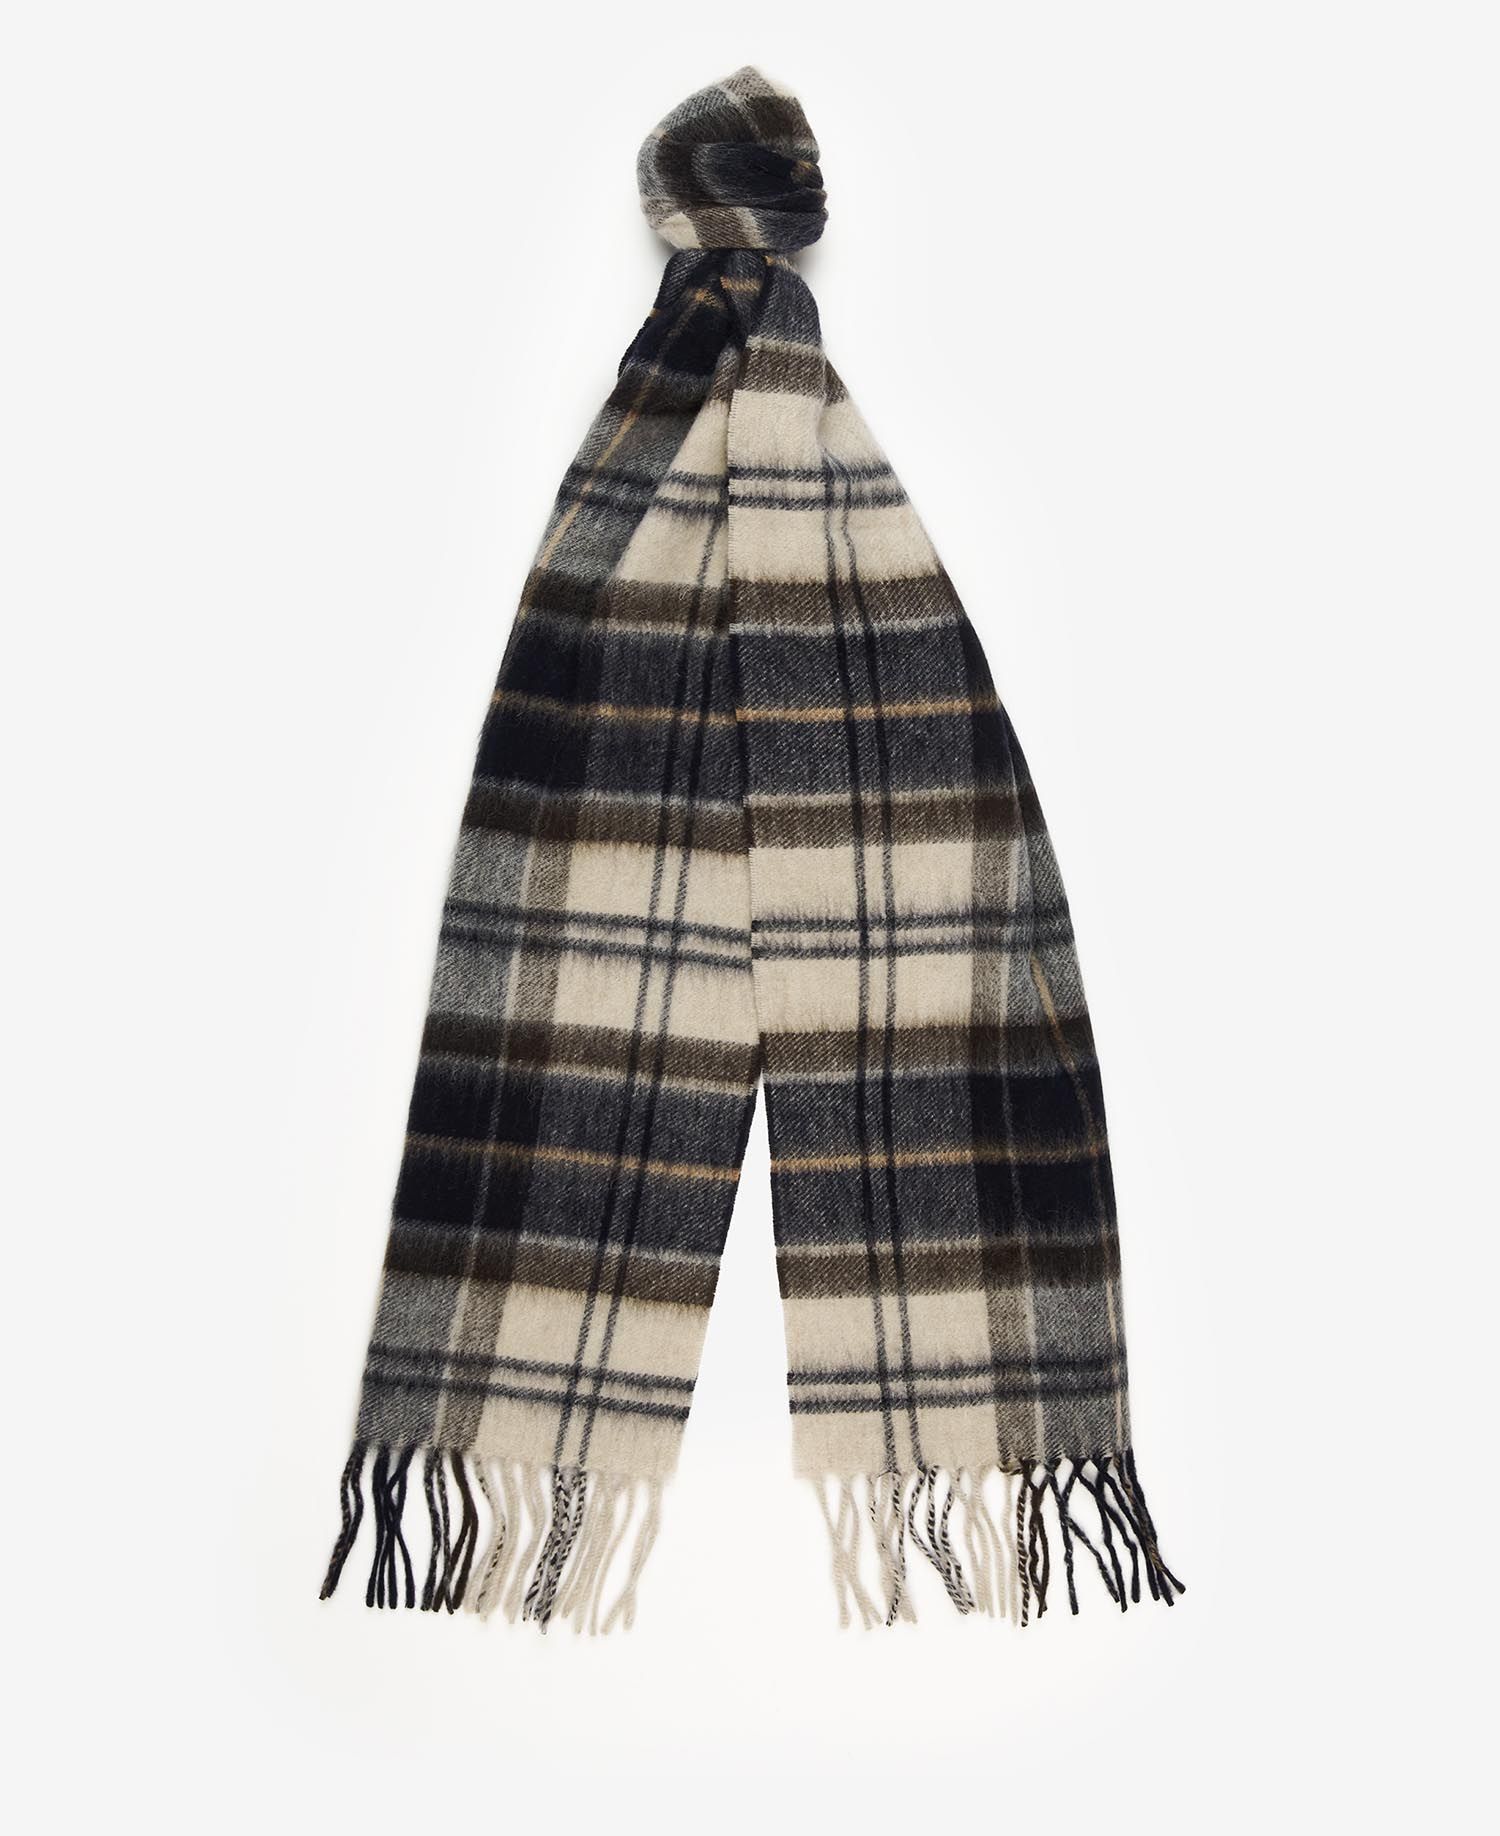 Ready For Winter With My Burberry Scarf - Your Average Guy